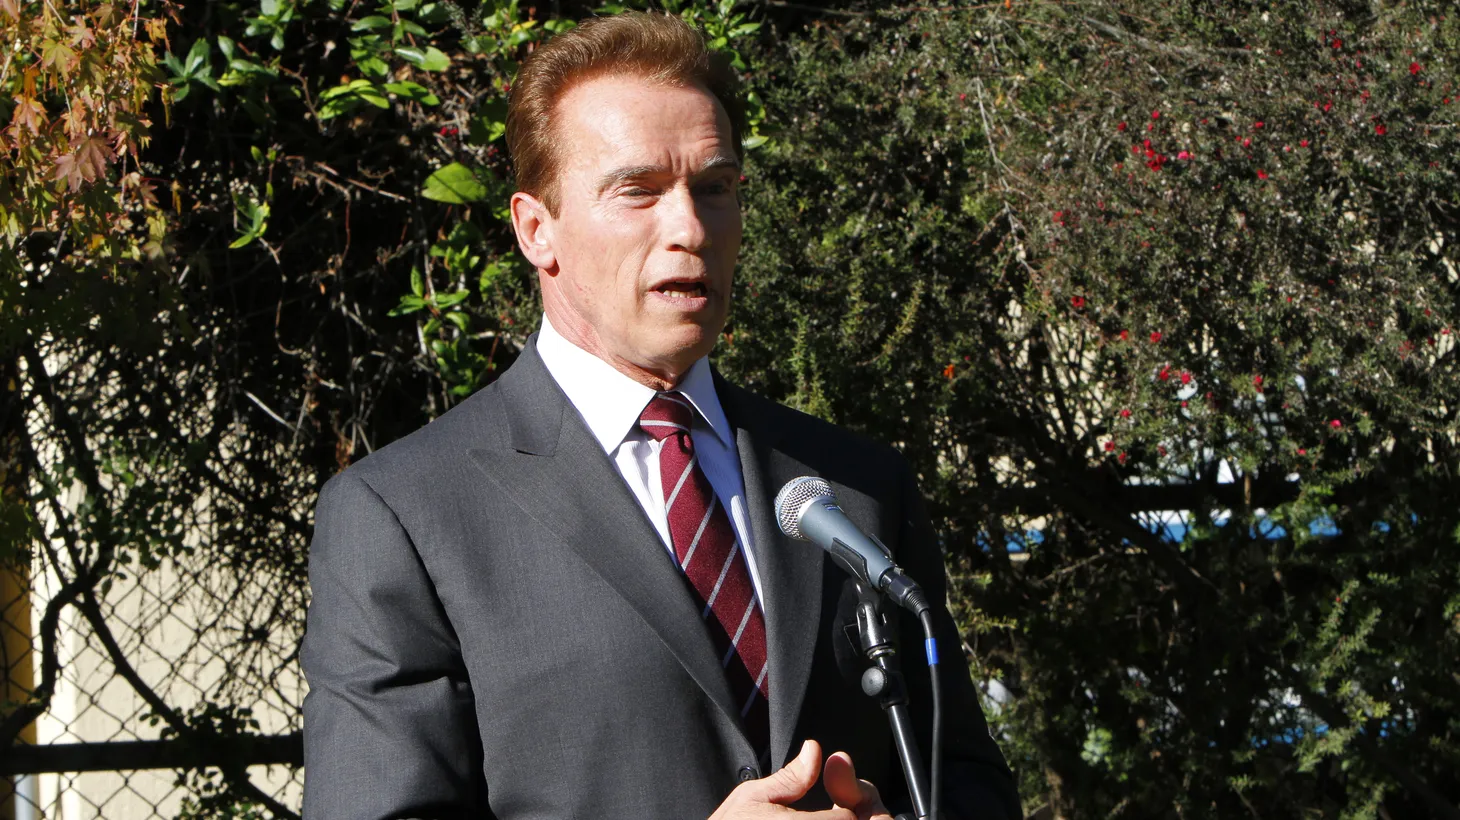 Then-Governor Arnold Schwarzenegger visits a Los Angeles elementary school to tout Proposition 49, which expanded after-school programs. He’s still fighting to preserve that victory.